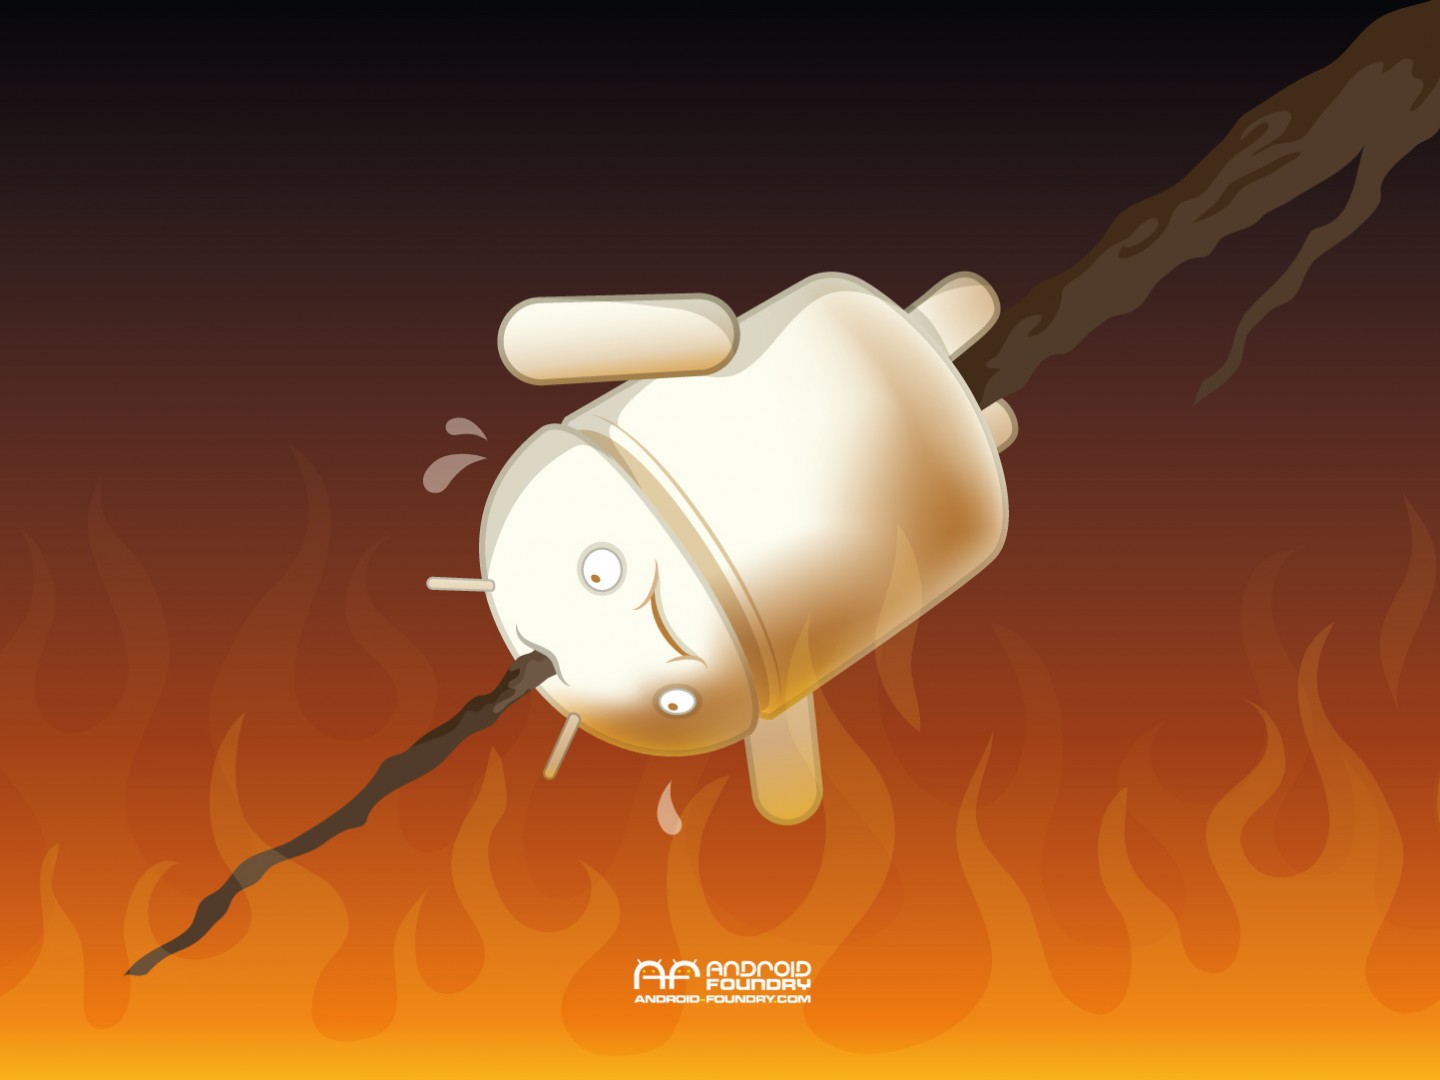 Wallpaper National Marshmallow Toasting Day Android Foundry